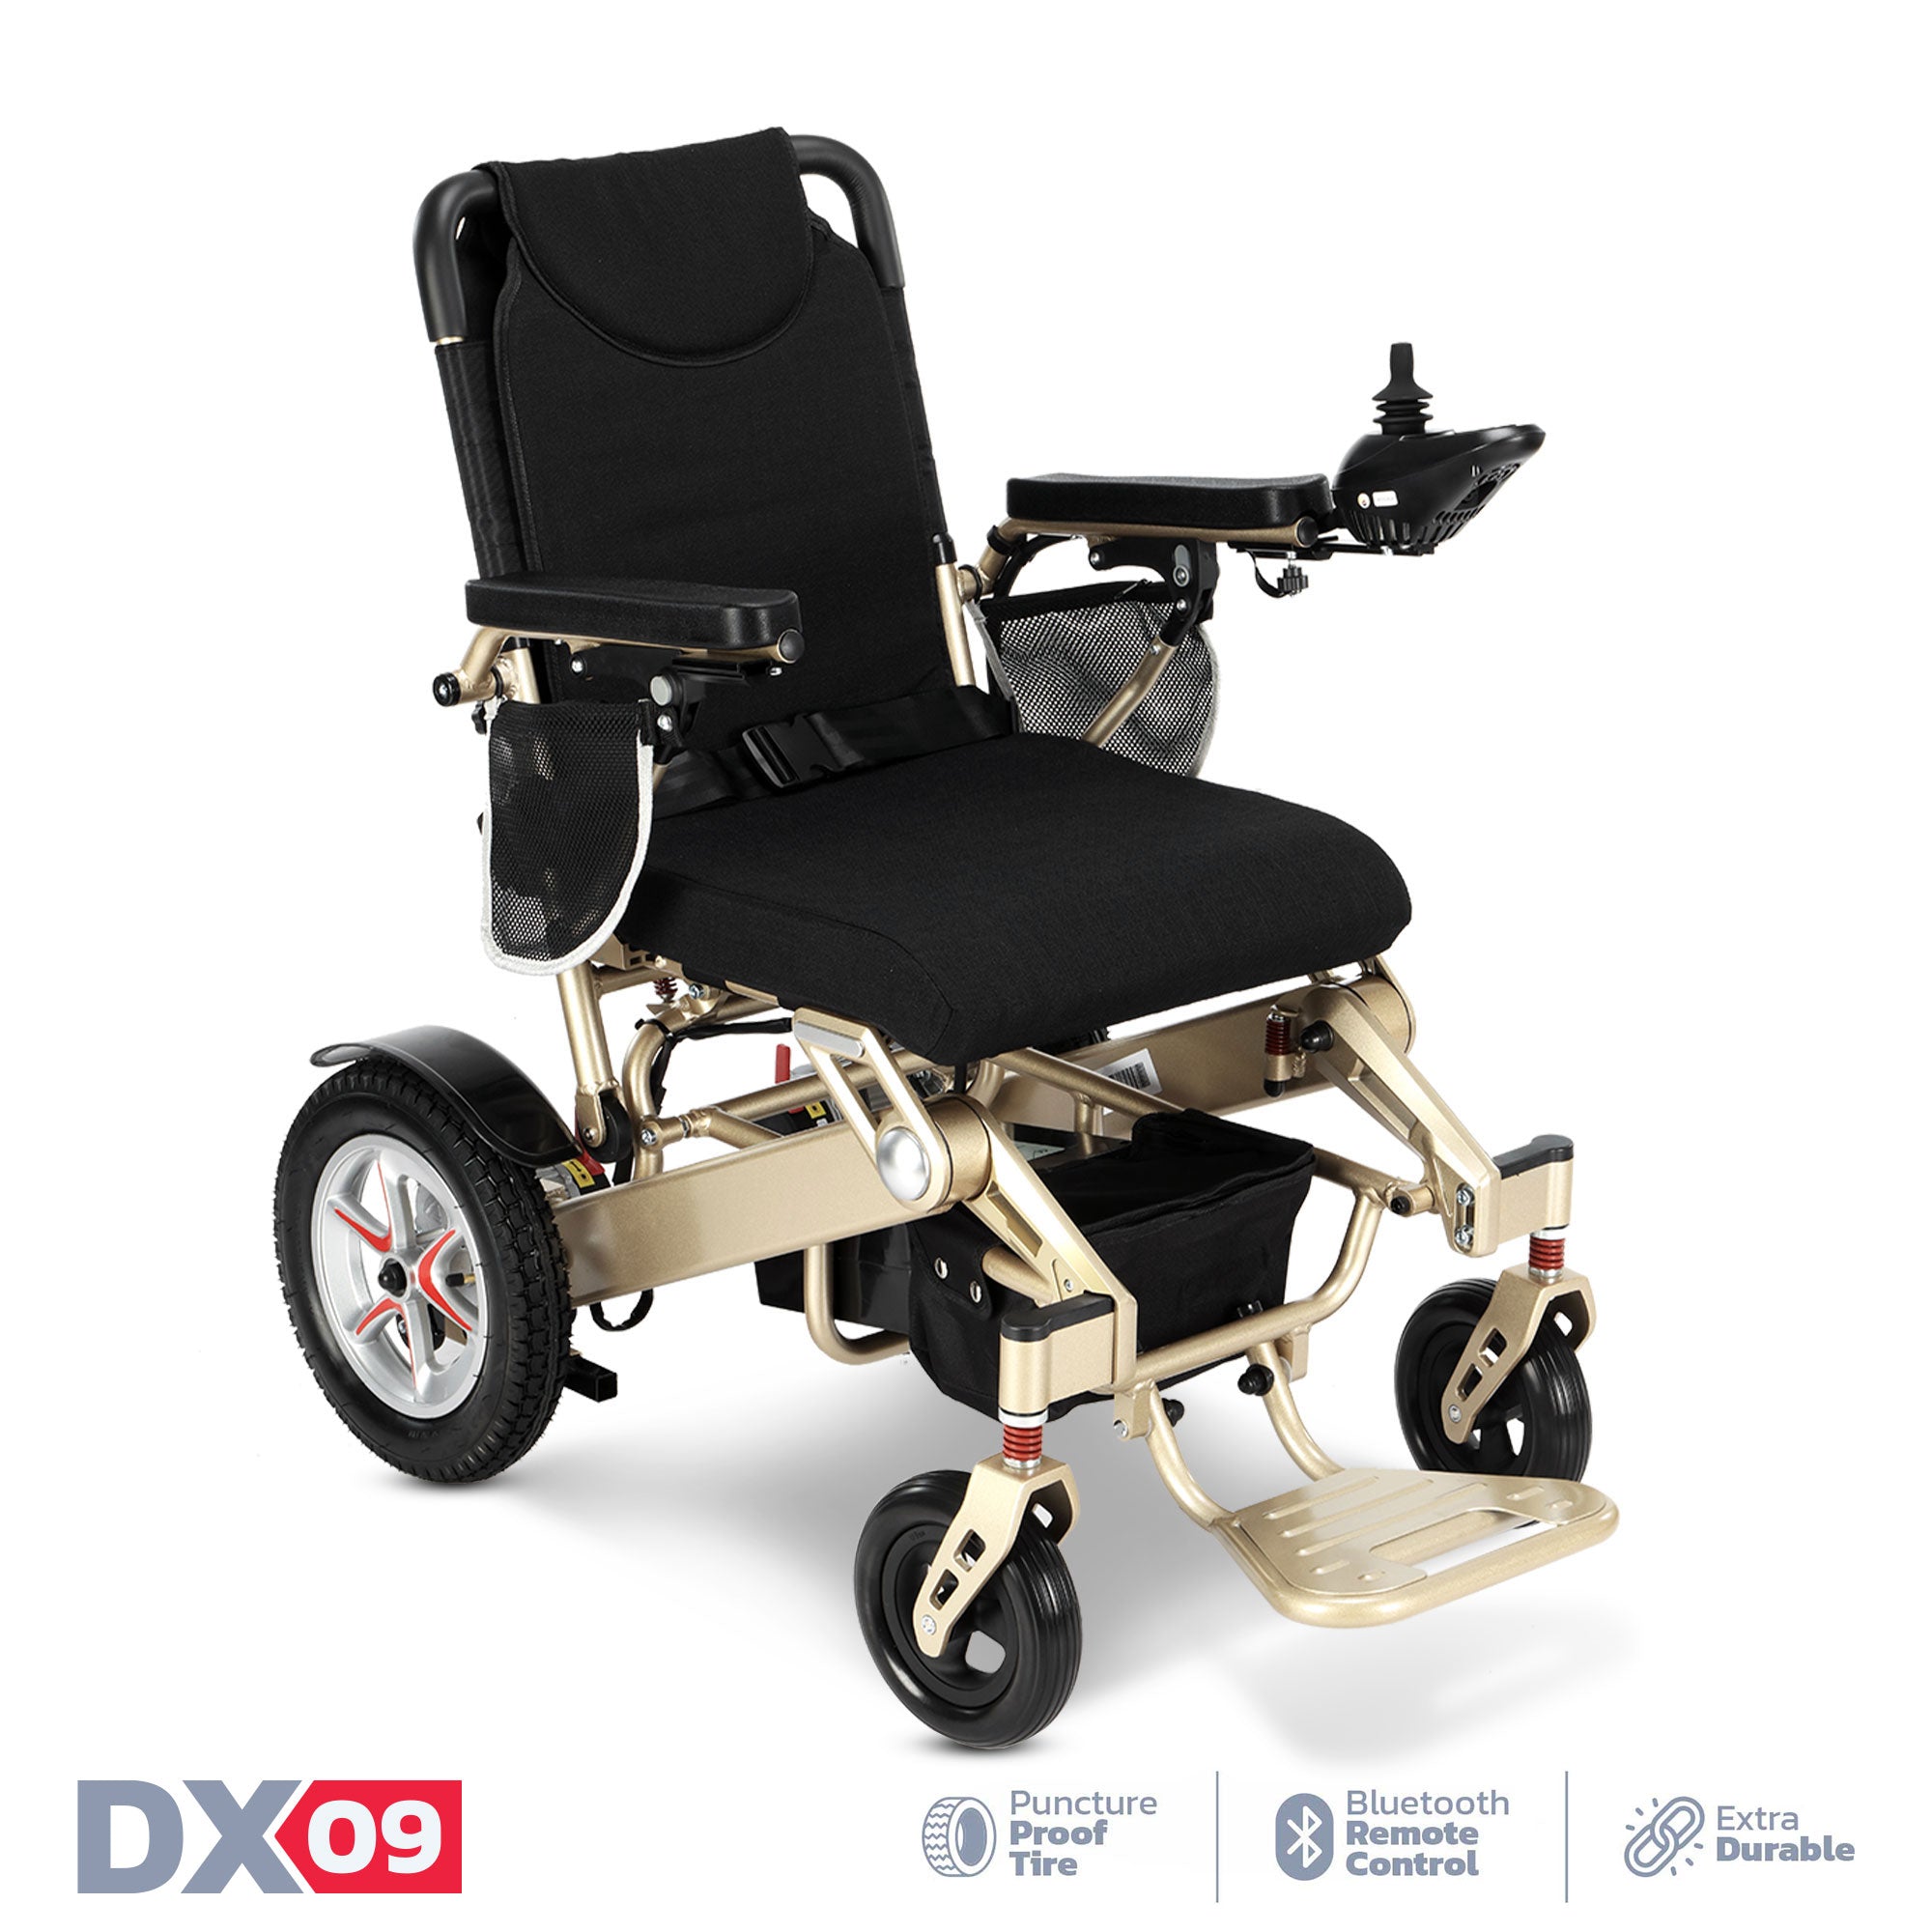 Rubicon DX09 - Deluxe Long-Range Electric Wheelchair - Electricwheelchair.Store